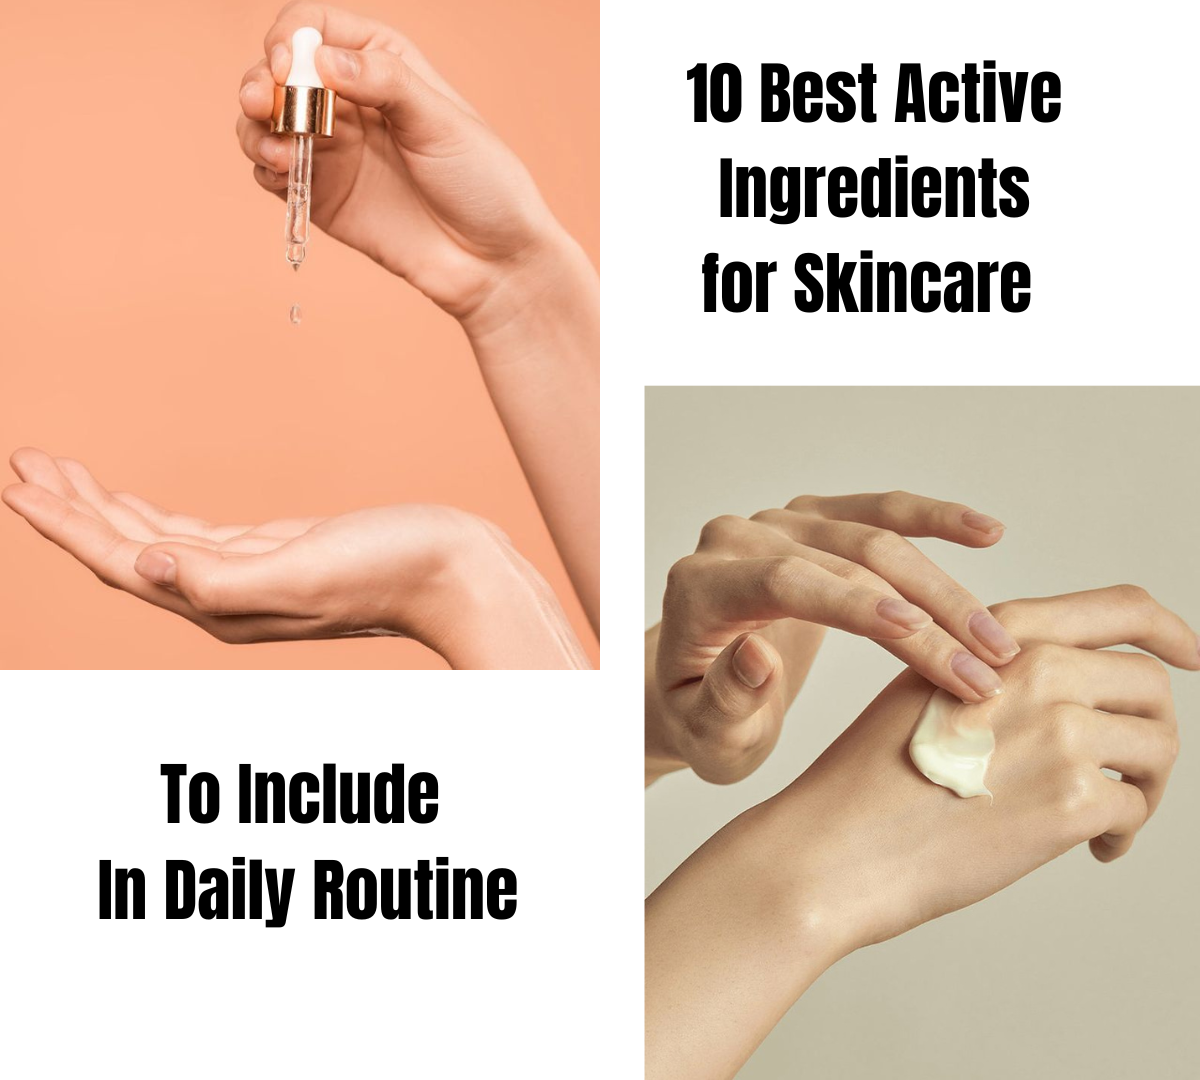 10 Best Active Ingredients for Skincare to Include in Daily Routine.